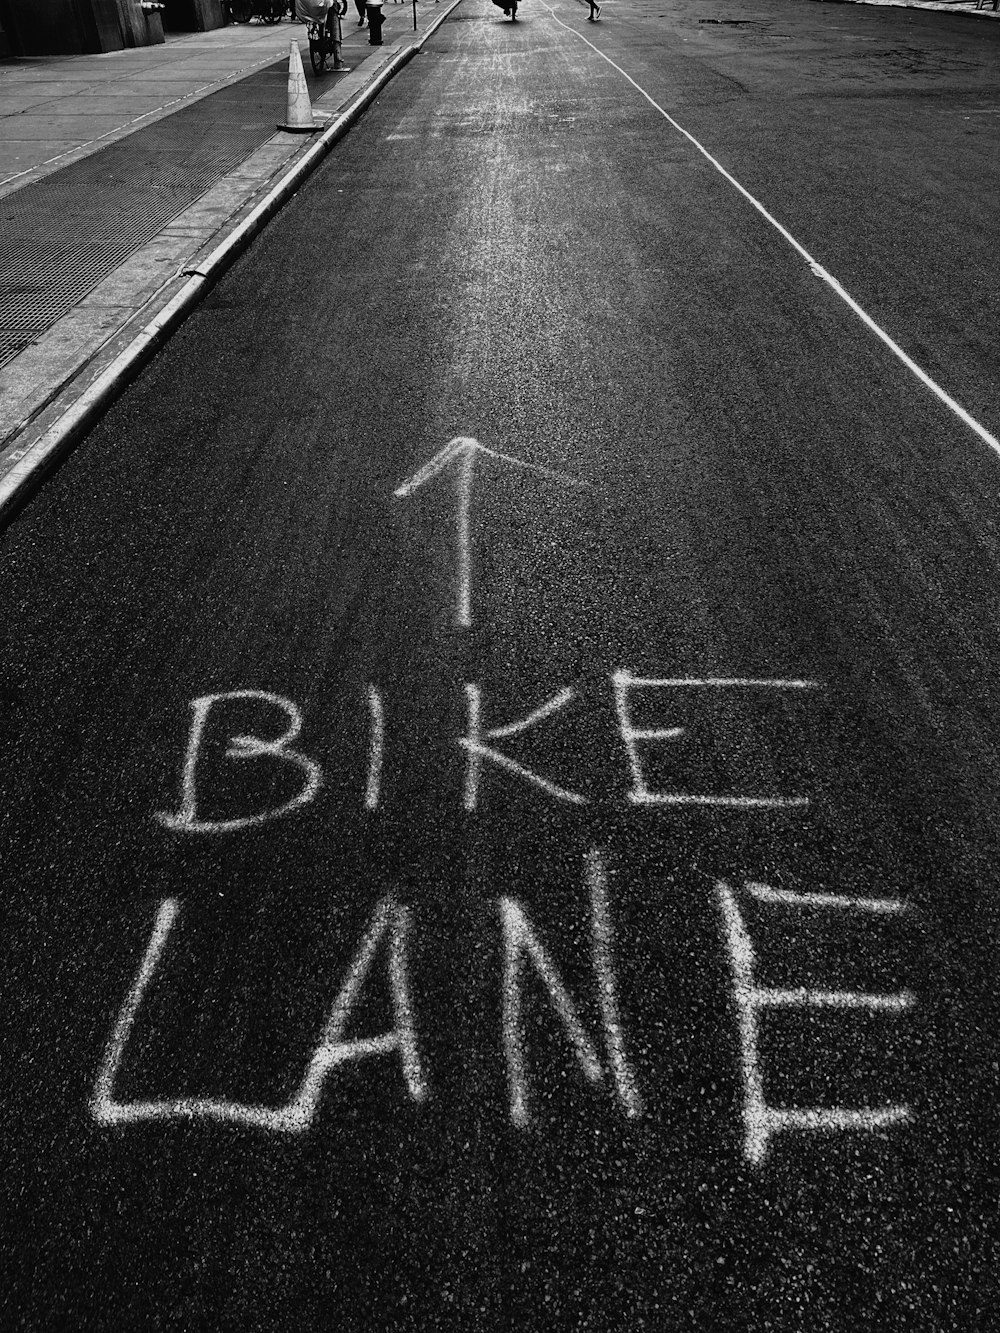 a black and white photo of a street with the words bike lane written in chalk